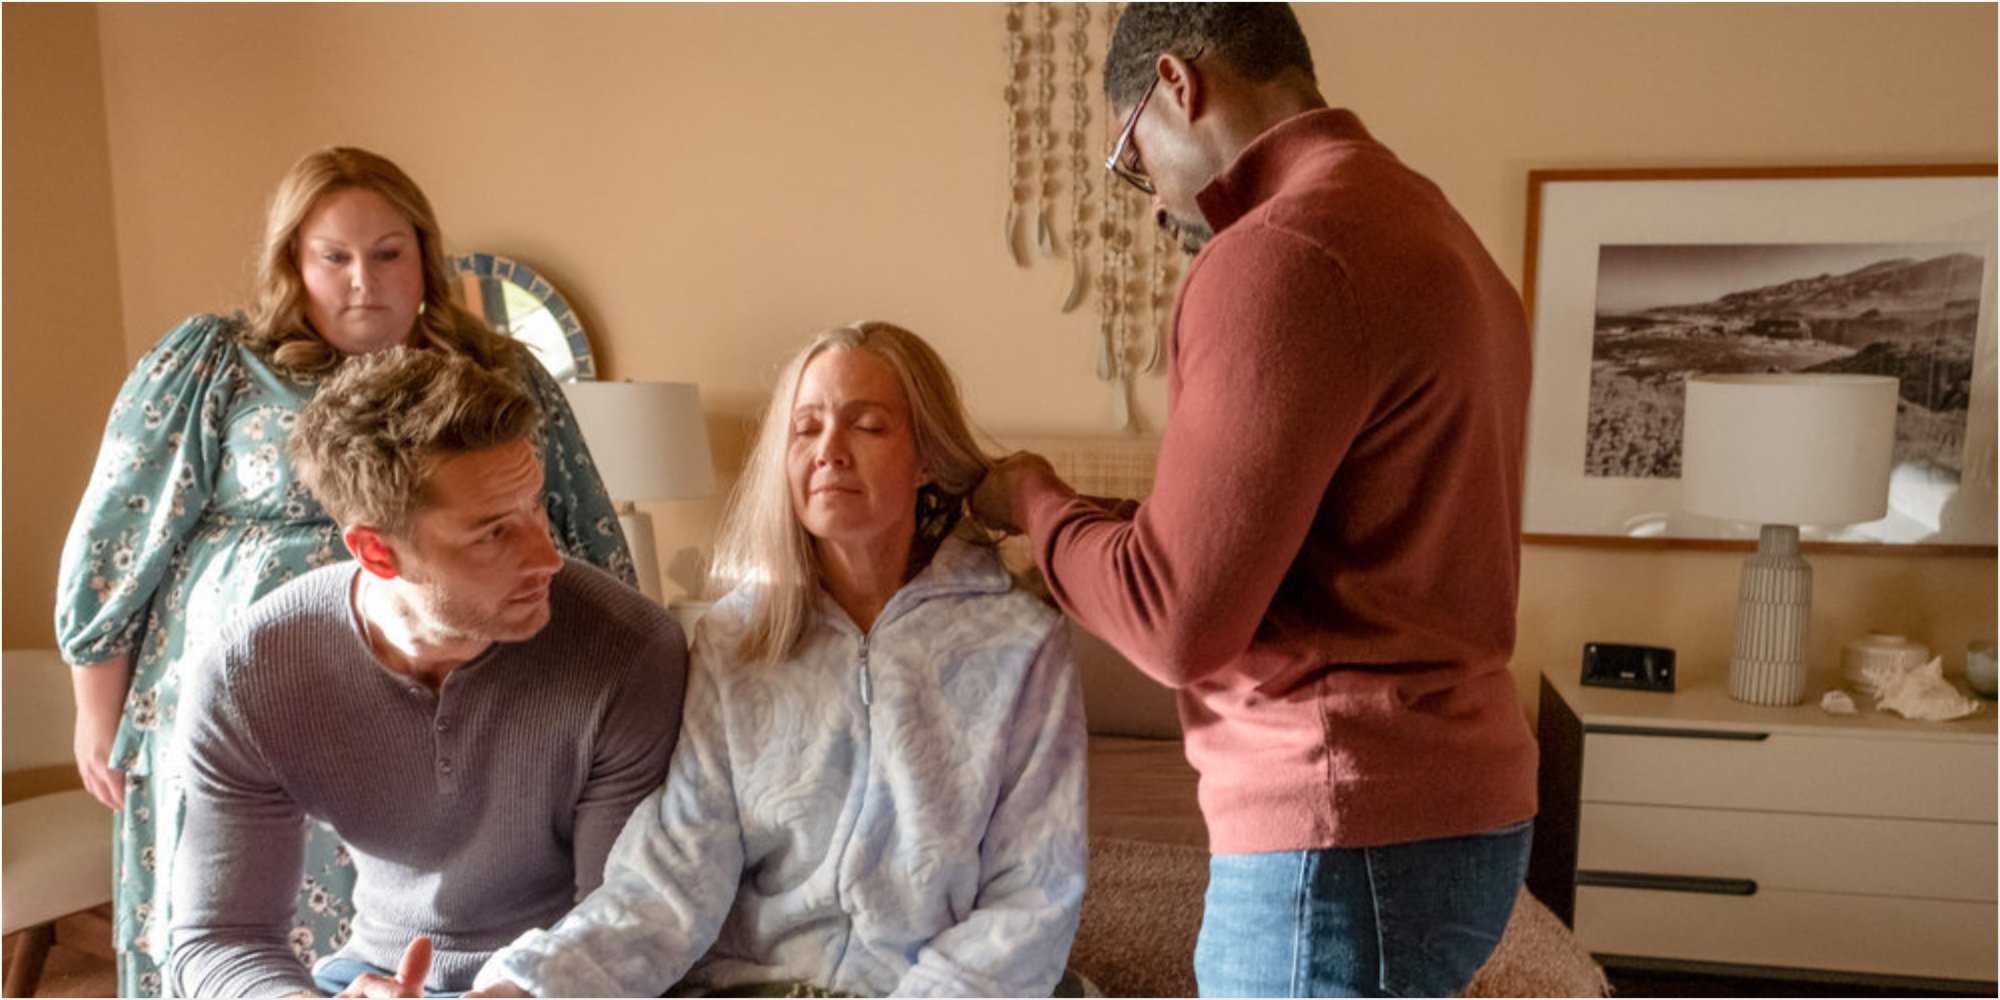 Chrissy Metz, Justin Hartley, Mandy Moore and Sterling K. Brown on the set of 'This Is Us.'